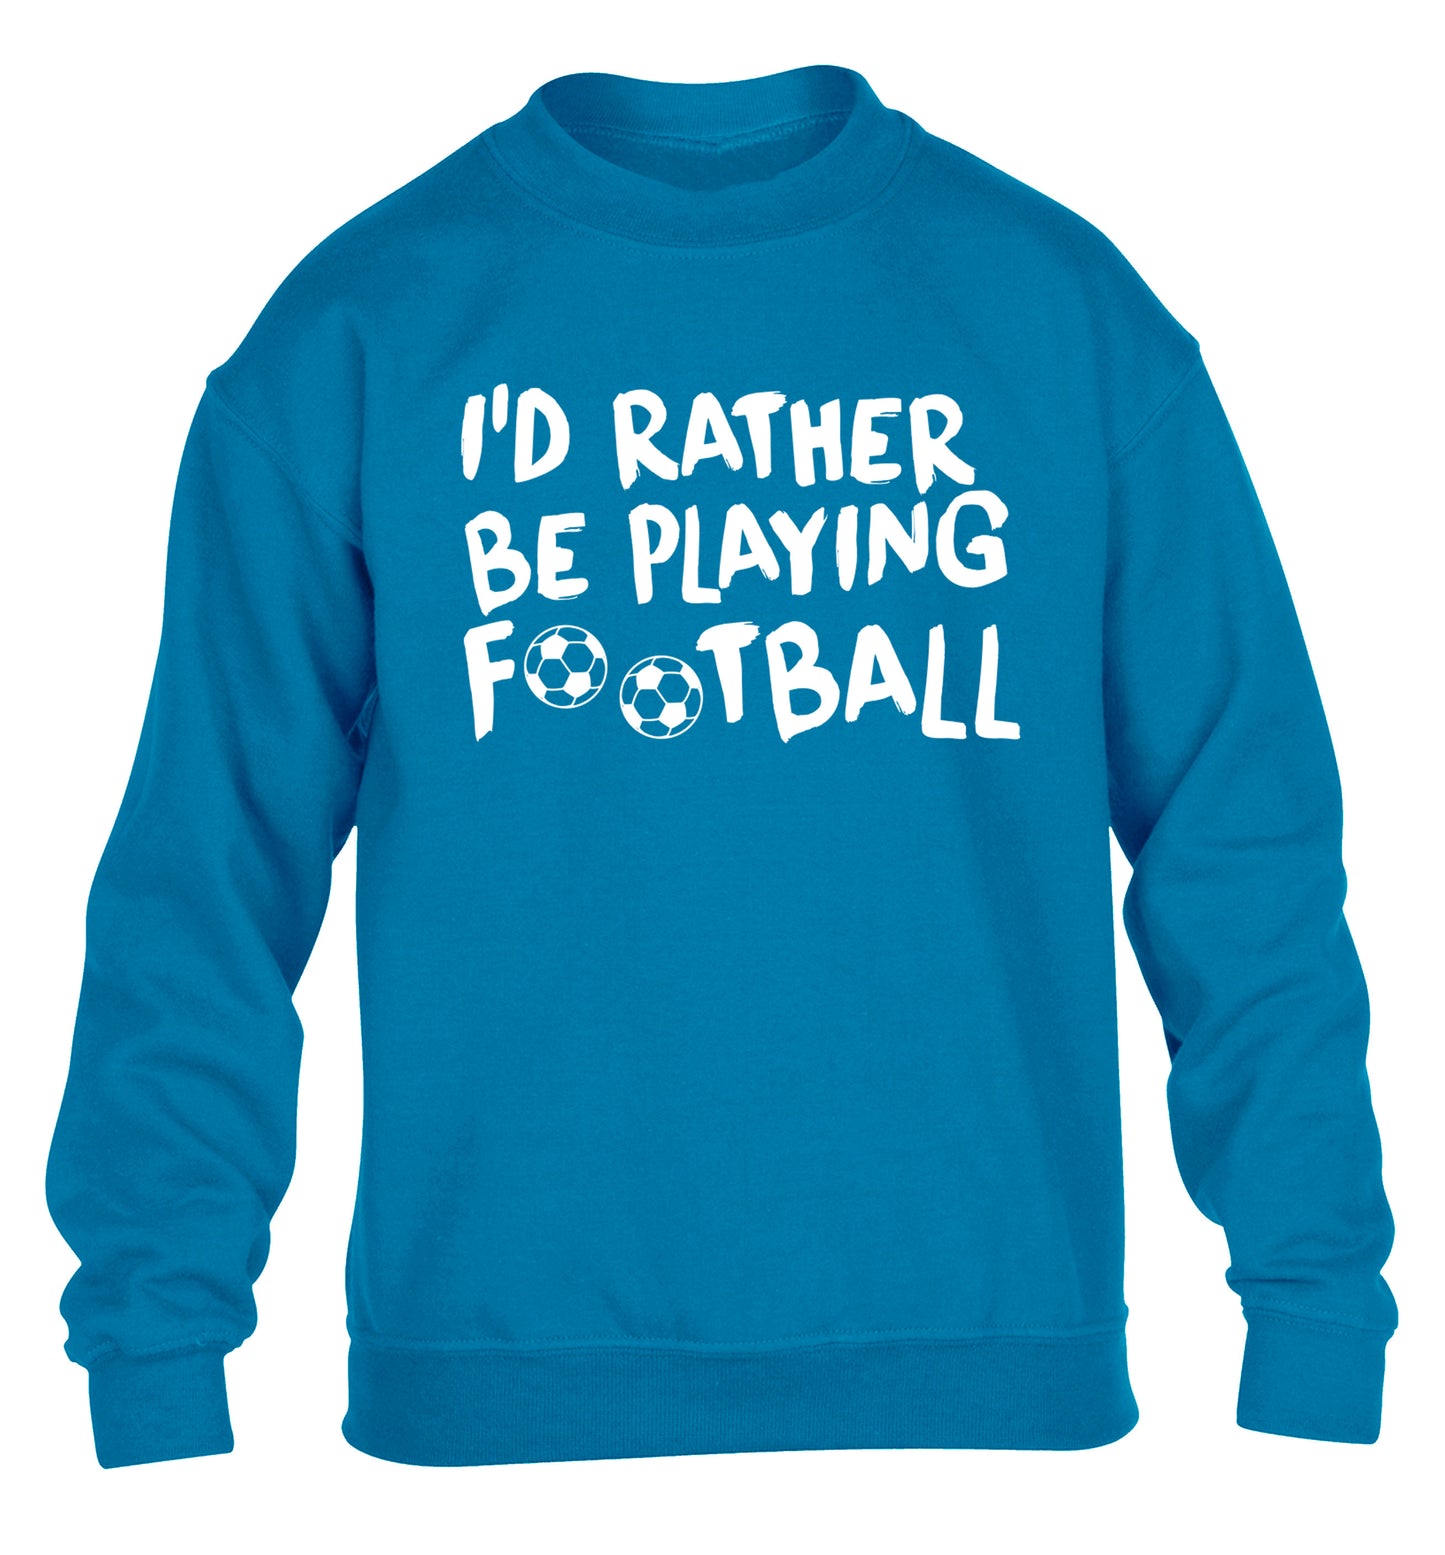 I'd rather be playing football children's blue sweater 12-14 Years